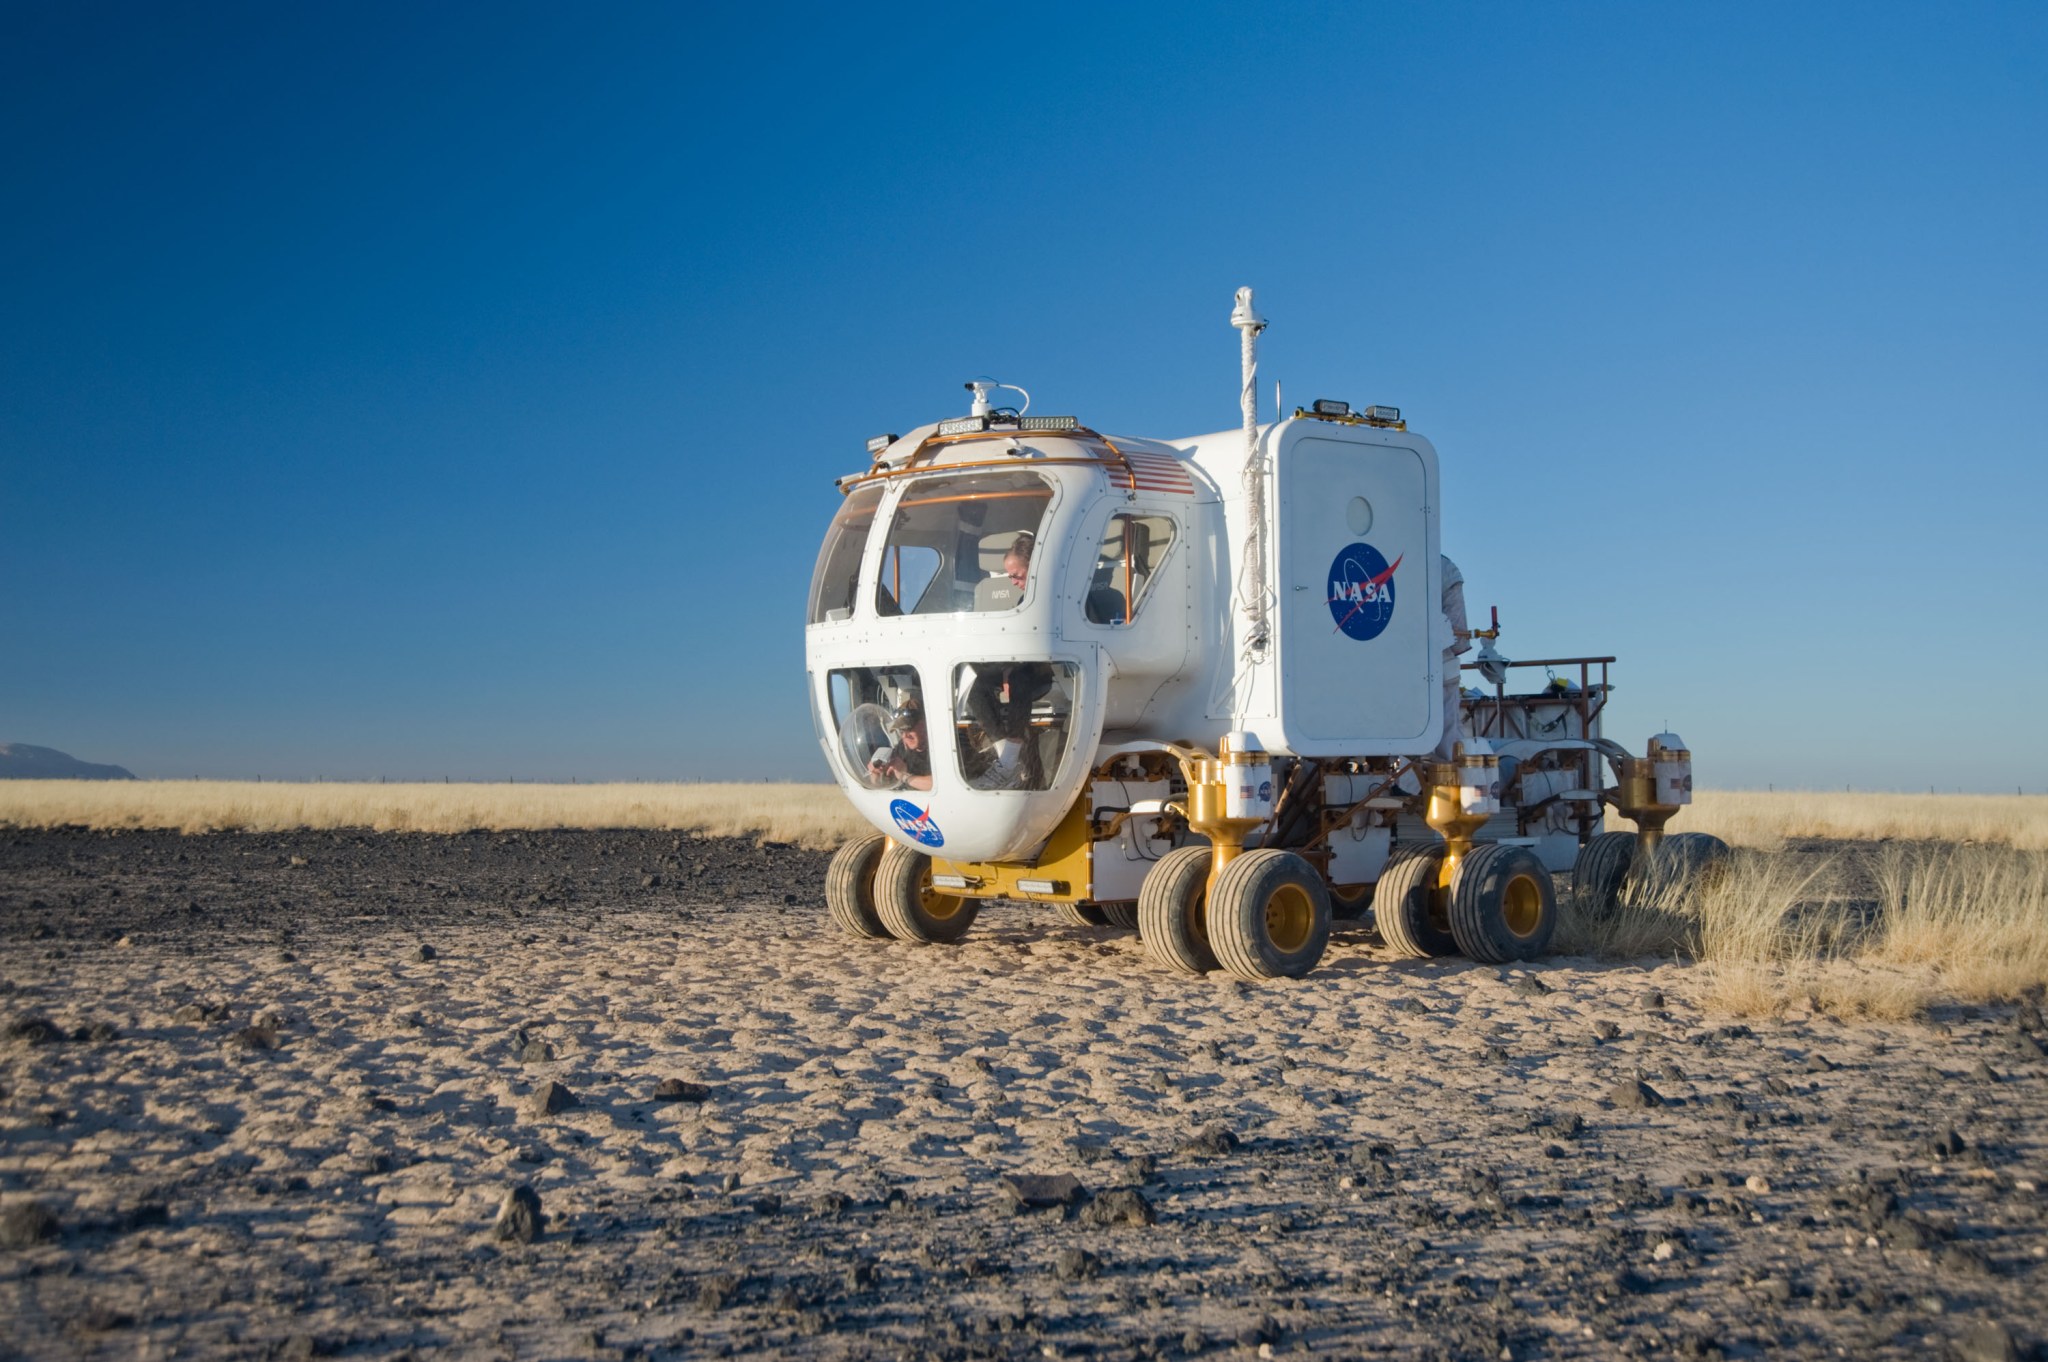 An image of NASA's Space Exploration Vehicle at Black Point Lava Flow in Arizona during the 2008 Desert RATS testing.